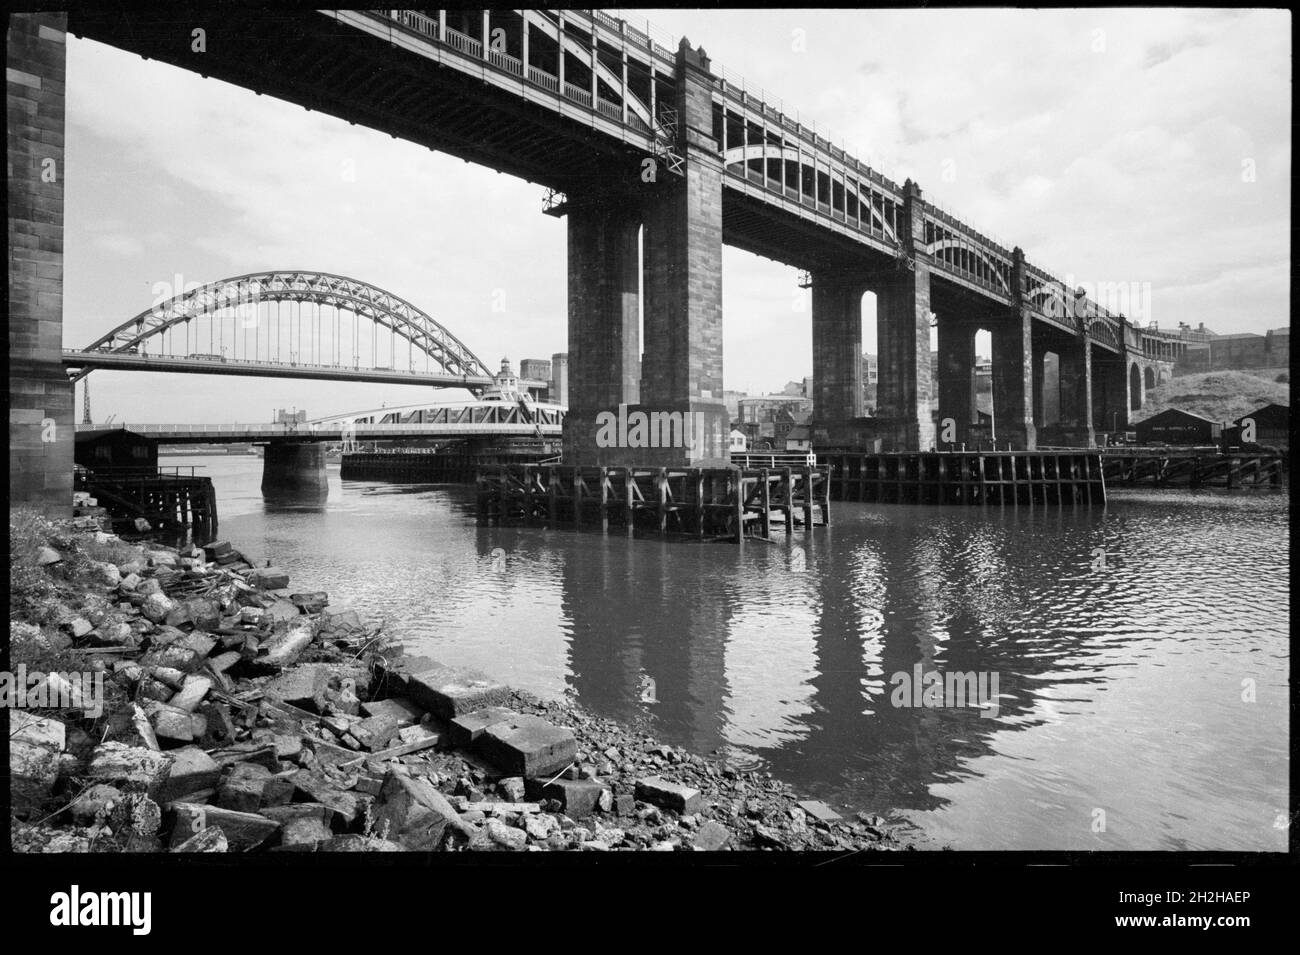 High Level Bridge, Newcastle Upon Tyne, c1955-c1980. A general view from the north bank of the River Tyne, showing the High Level Bridge in the foreground and the Swing Bridge and New Tyne Bridge in the background, seen from the west. The High Level Bridge is a combined road and railway bridge completed in 1849. The roadway is on the lower beam, and the railways above, supported by six segmental arches of cast iron, and five stone piers. Both levels have open parapets, and the south side of the bridge consists of an ashlar pier which extends towards the river. To the left is the shorter Swing Stock Photo